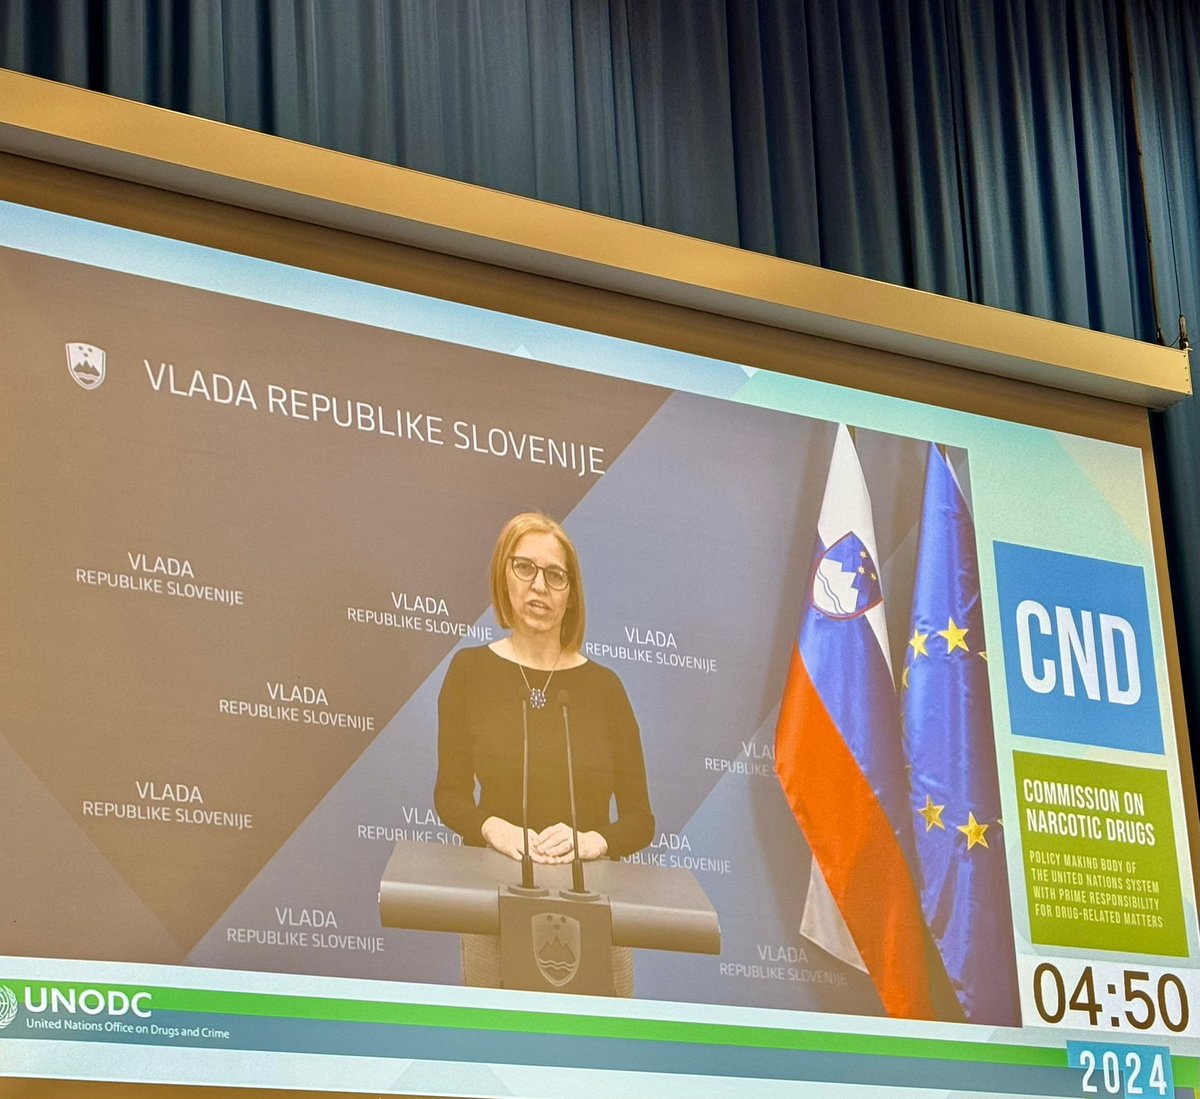 Minister Valentina Prevolnik Rupel in her speech at the #CNDHighLevelWeek underscored the importance of early prevention and protection of children and families. Therefore 🇸🇮 in #Pledge4Action commits to enhance #DrugPrevention, treatment & recovery programs in the next 4 years.